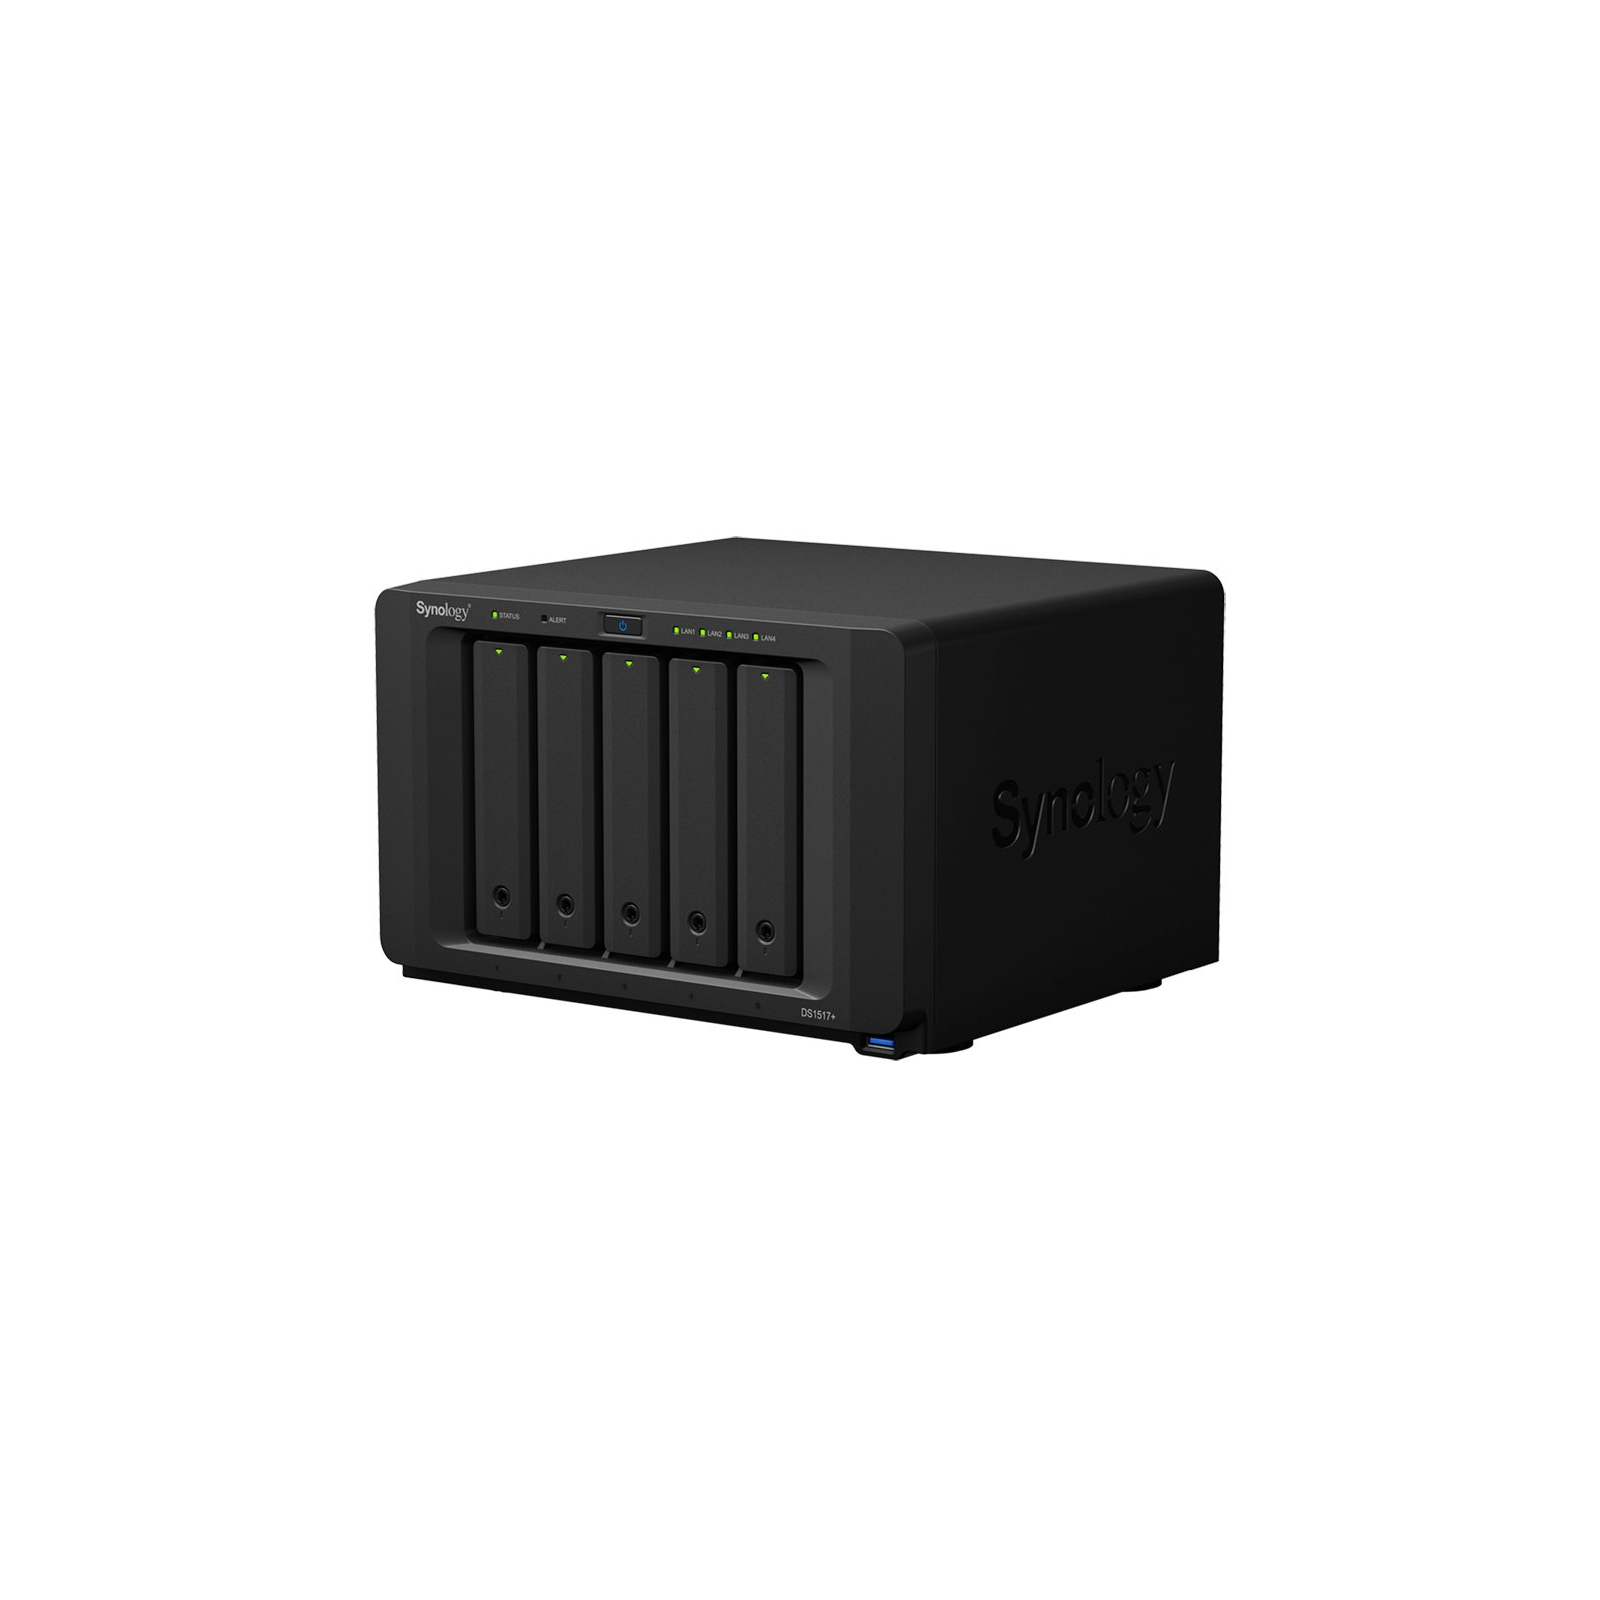 NAS Synology DS1517+2GB